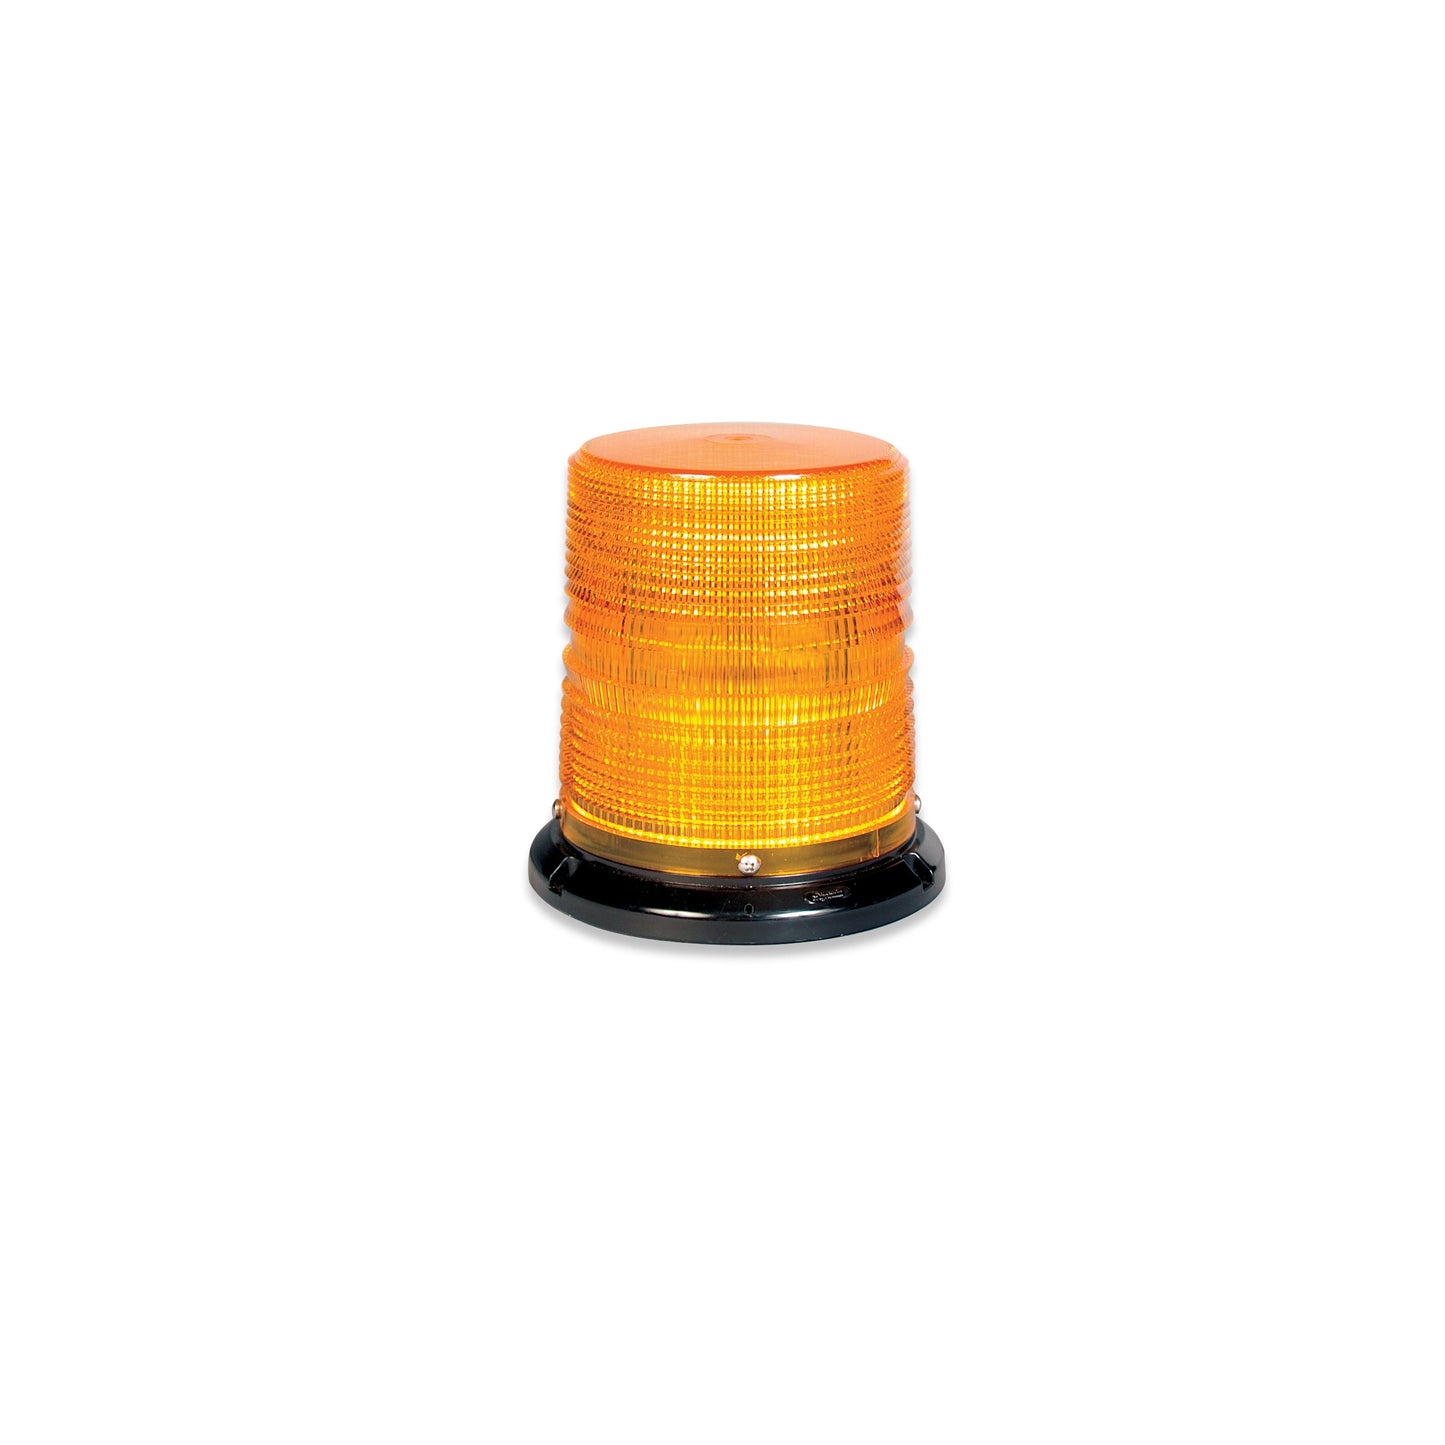 Soundoff Signal ELB45BCL0GC 4500 Series Led Beacon, 10-30V, Sae J845 Class 1 - Flat/Pipe Mount, 4" Clear Dome/ Green Leds